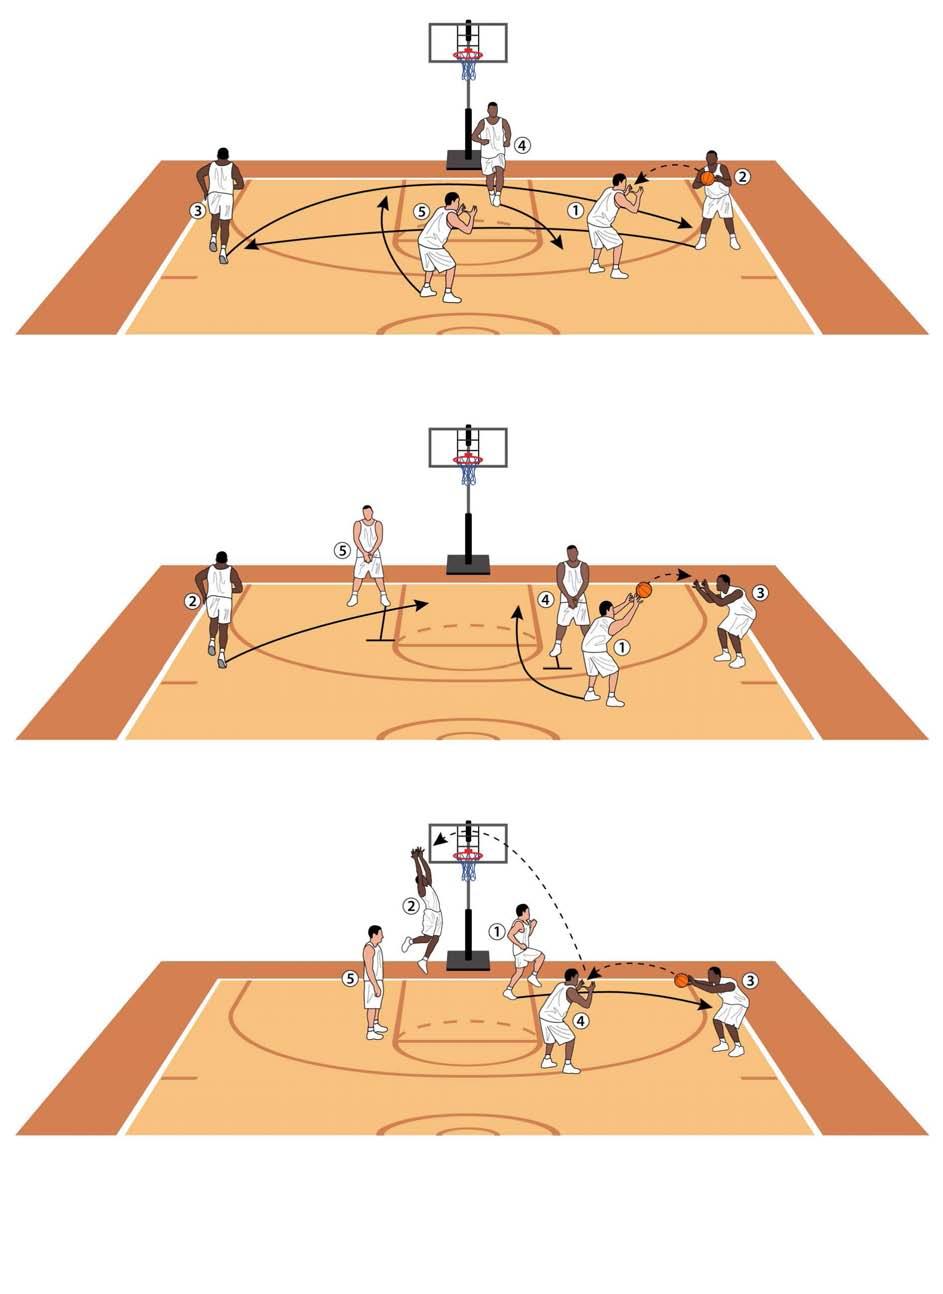 Secondary Break Backdoor Screen Creates Lob Opportunity The initial ball handler on the right wing ends up on the opposite side then in position for a perfectly placed backdoor lob WHY USE IT